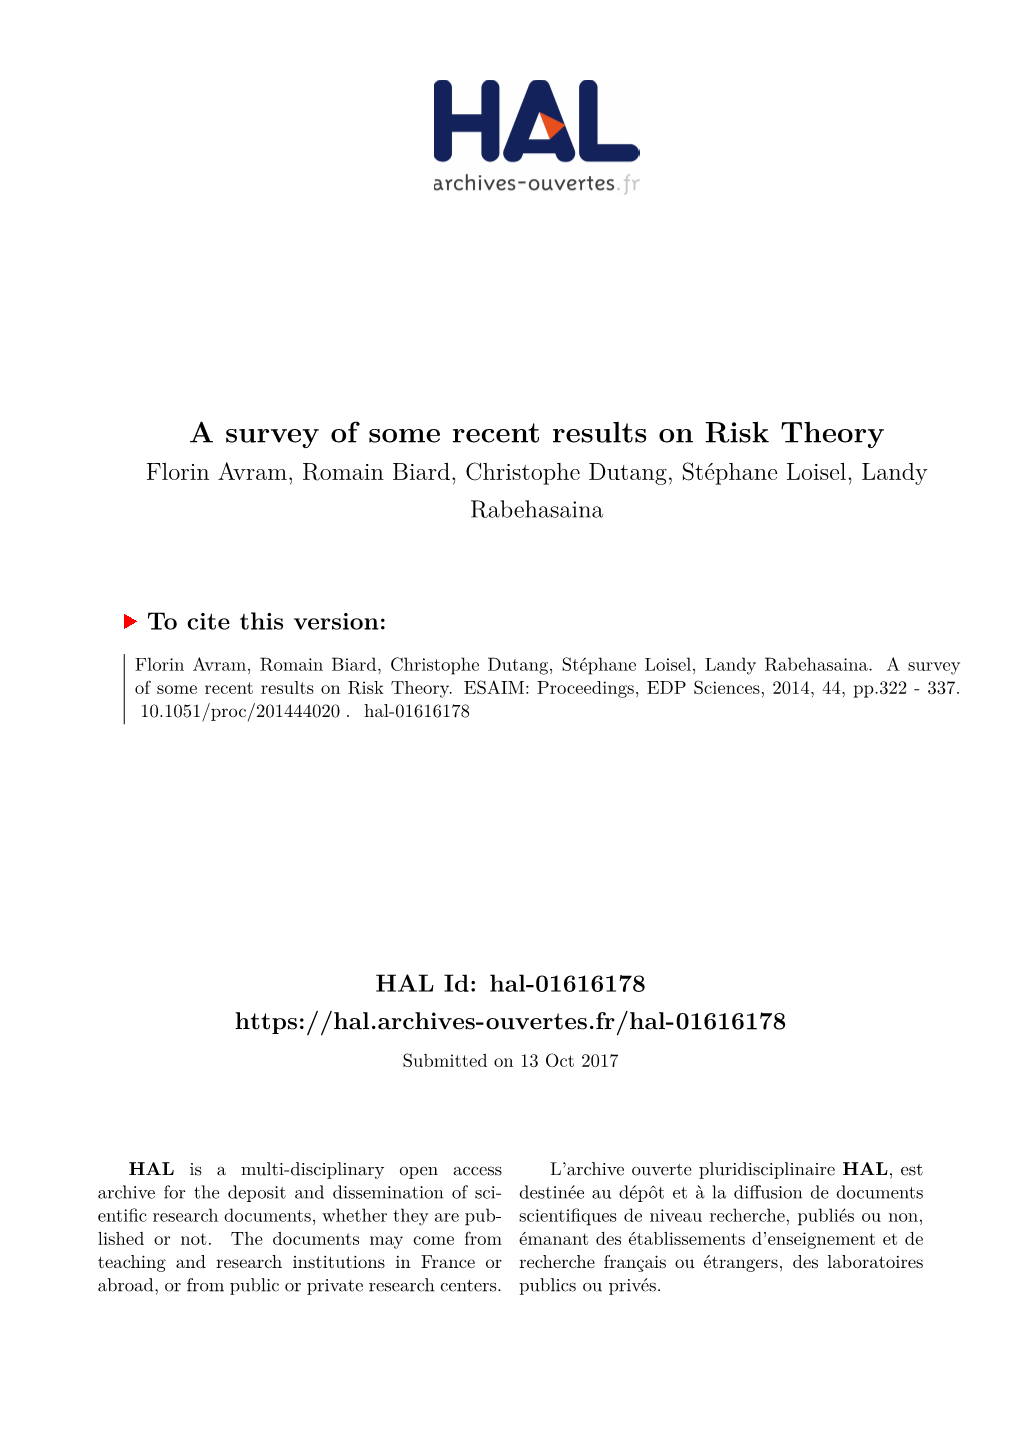 A Survey of Some Recent Results on Risk Theory Florin Avram, Romain Biard, Christophe Dutang, Stéphane Loisel, Landy Rabehasaina